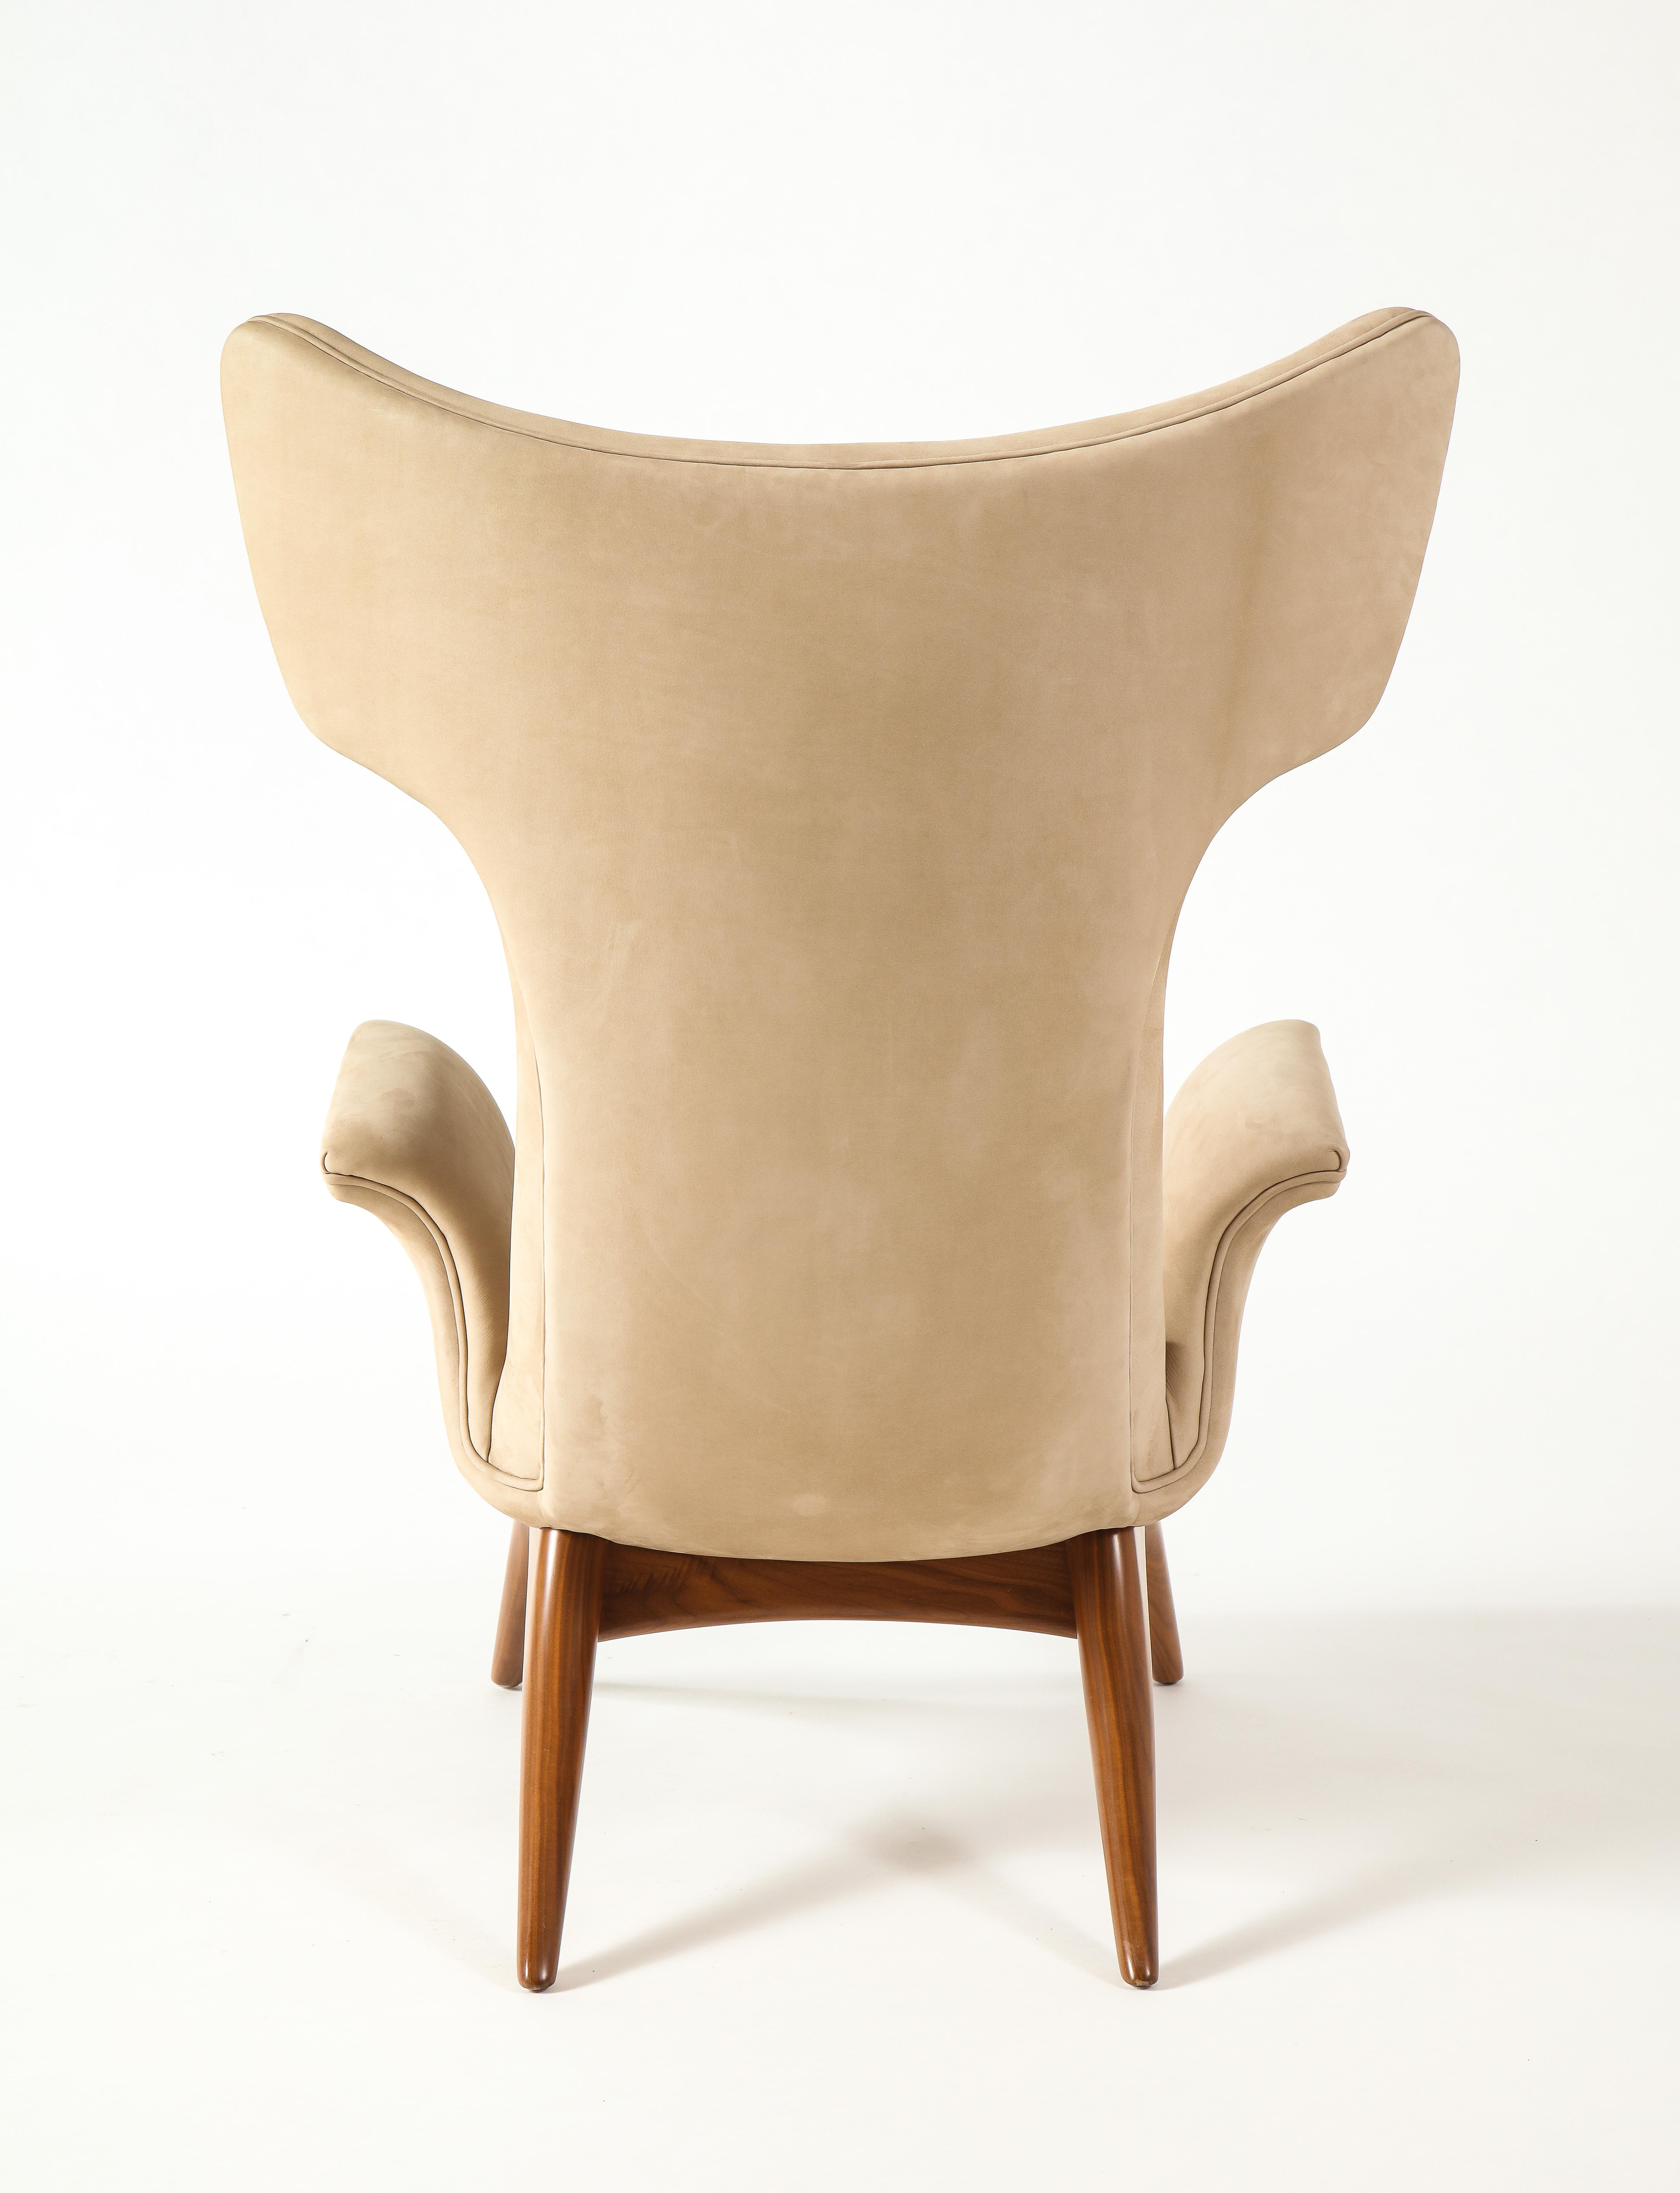 Vladimir Kagan Ondine Chair with Sueded Leather Upholstery & Natural Walnut Base 3